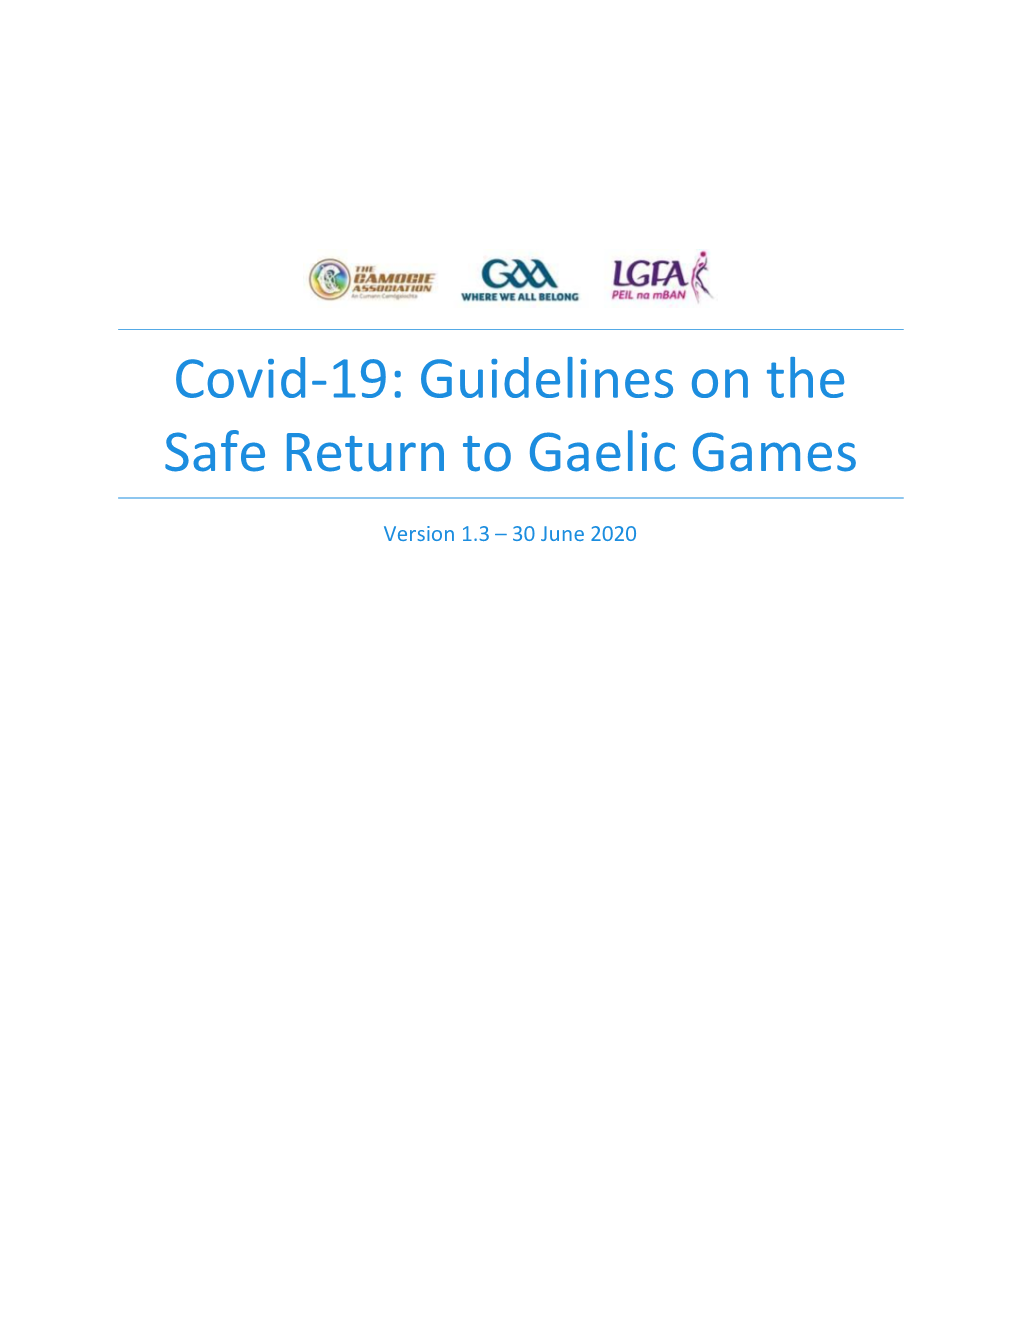 Covid-19: Guidelines on the Safe Return to Gaelic Games